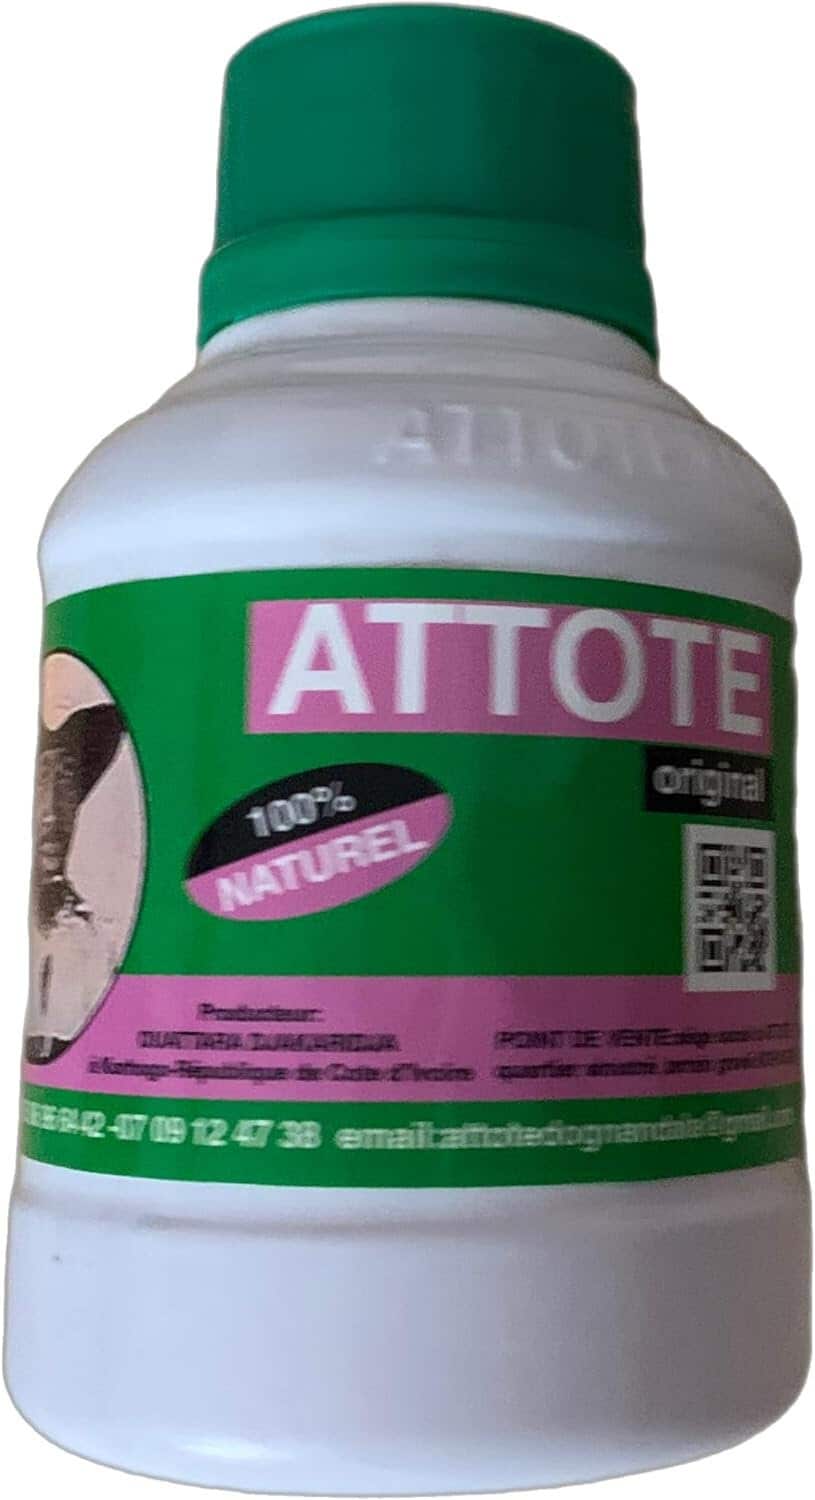 African Attote+ Dietary Supplement – Golden Perfume